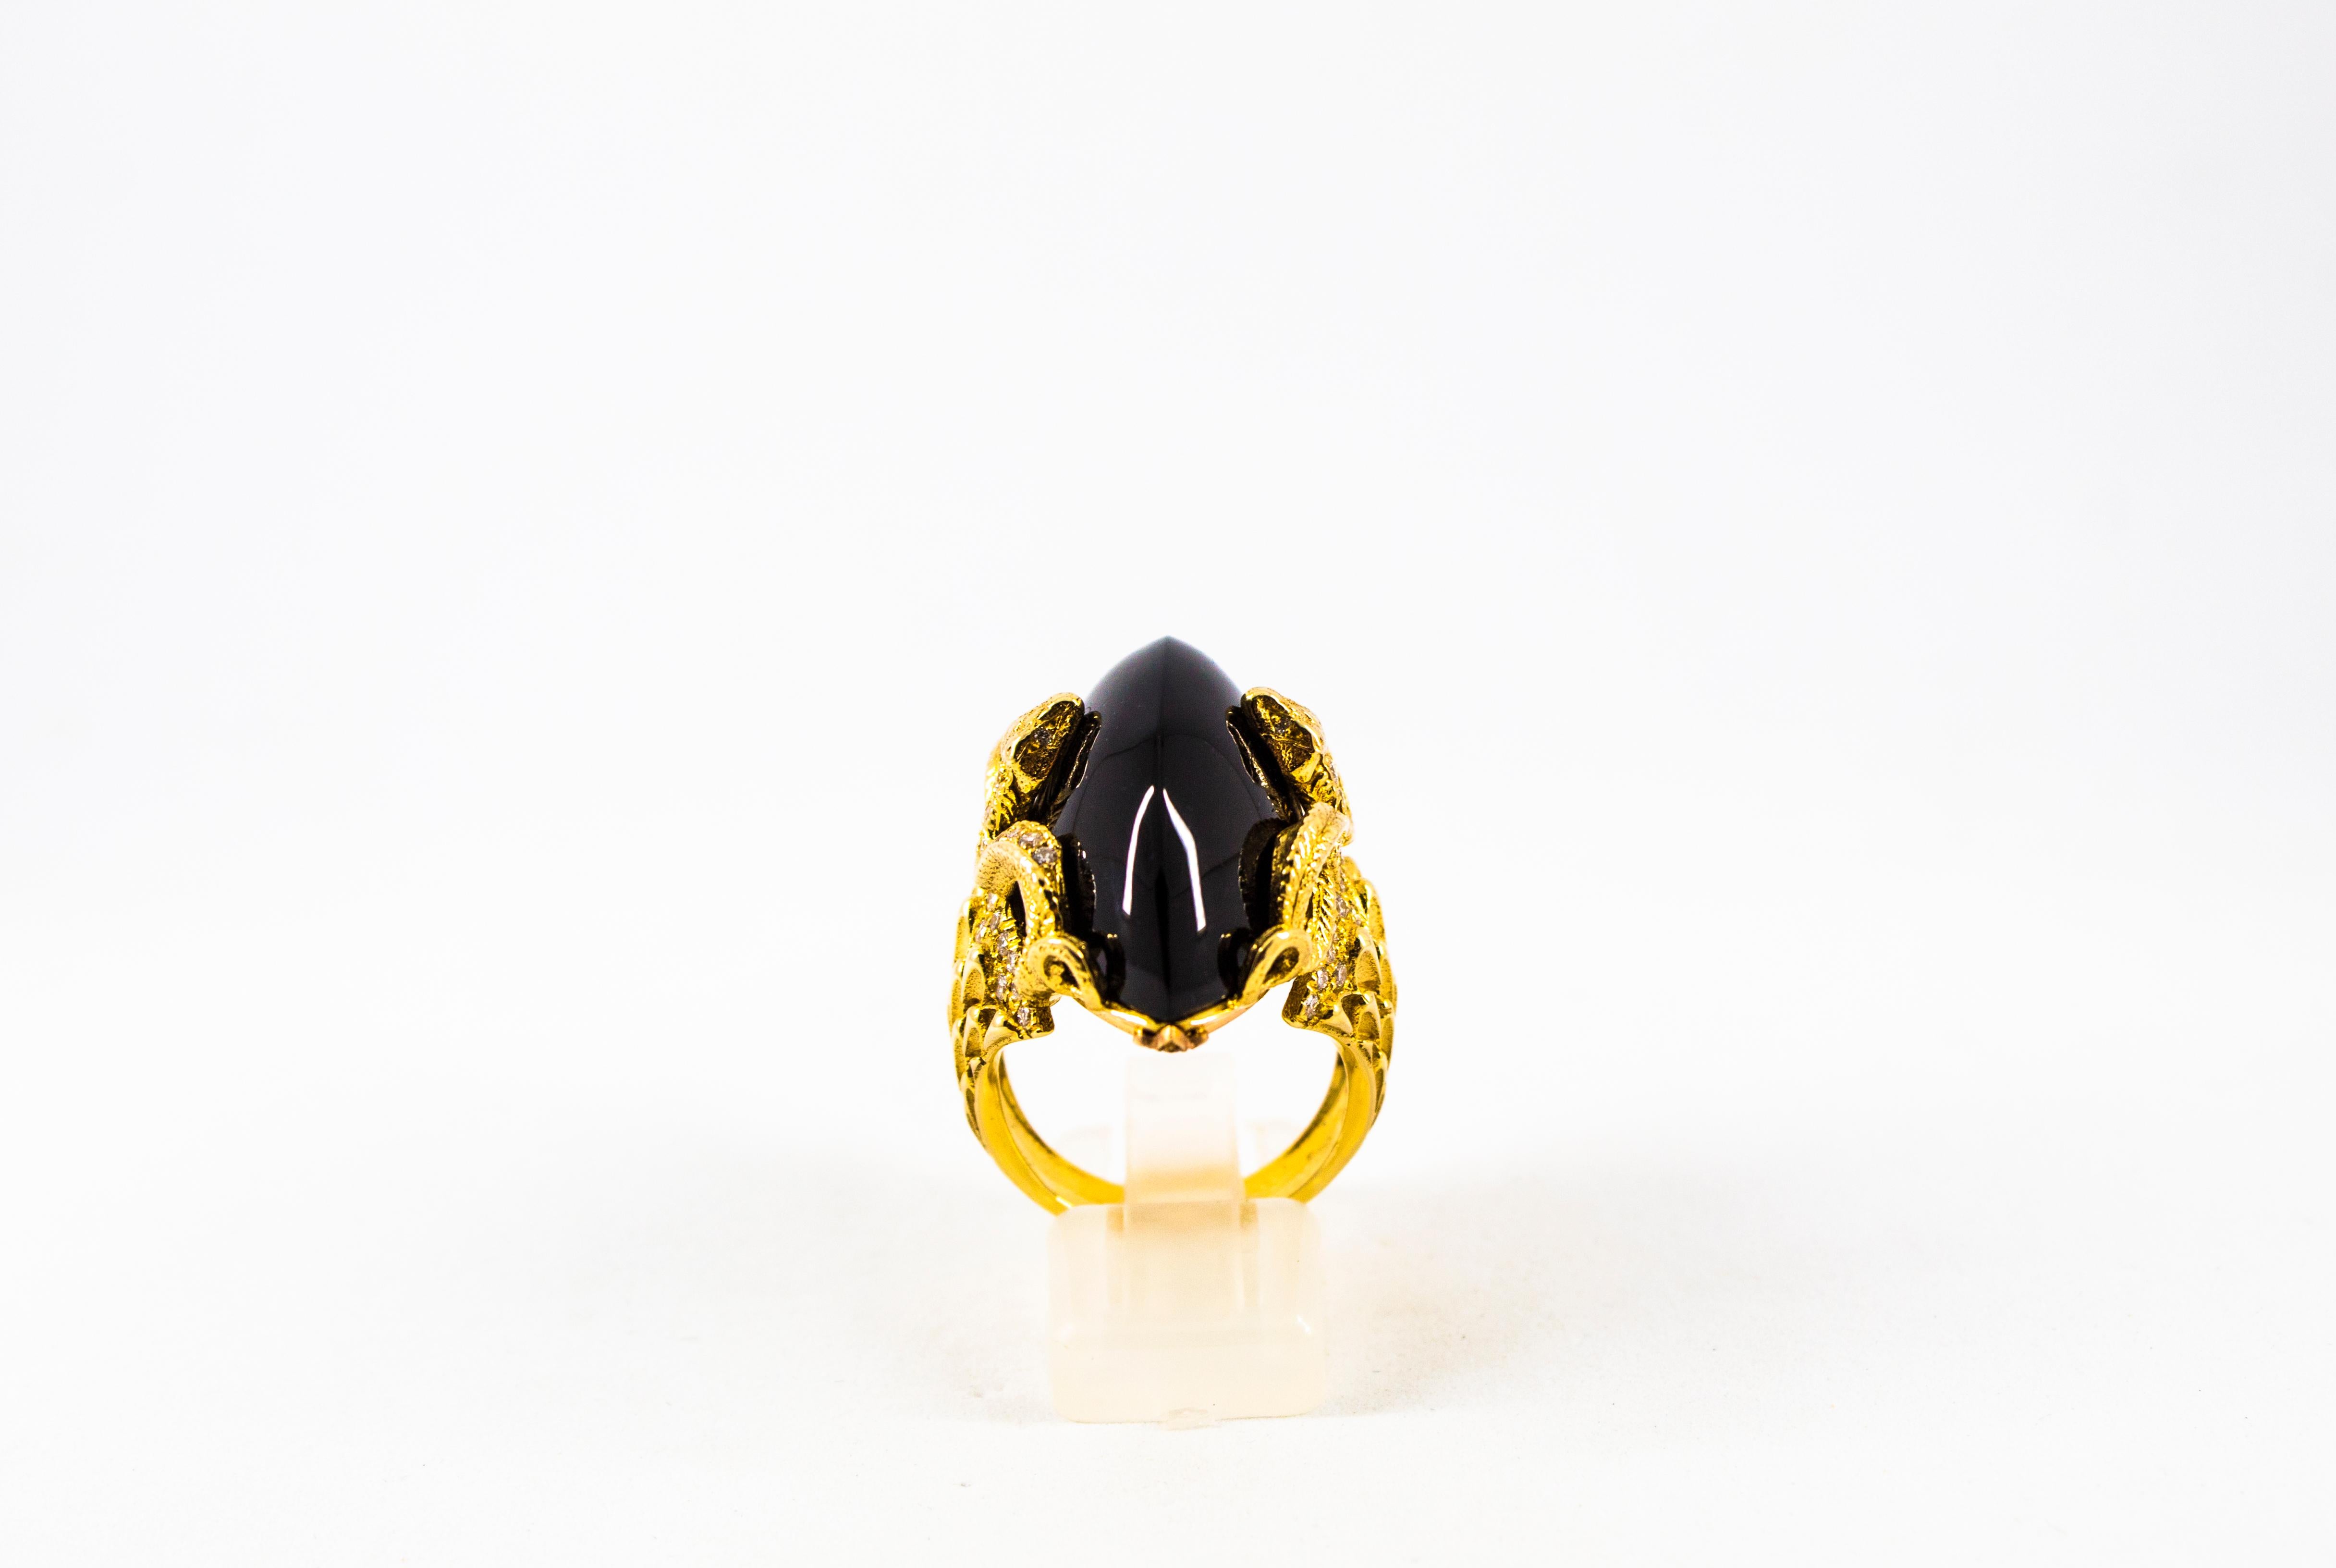 This Ring is made of Sterling Silver and 24k Yellow Gold Plate.
This Ring is available also in 24K White Gold Plate or in 9, 14 or 18K Yellow or White Gold.
This Ring has 0.76 Carats of White Brilliant Cut Zircons.
This Ring has a 36.25 Carats Noir